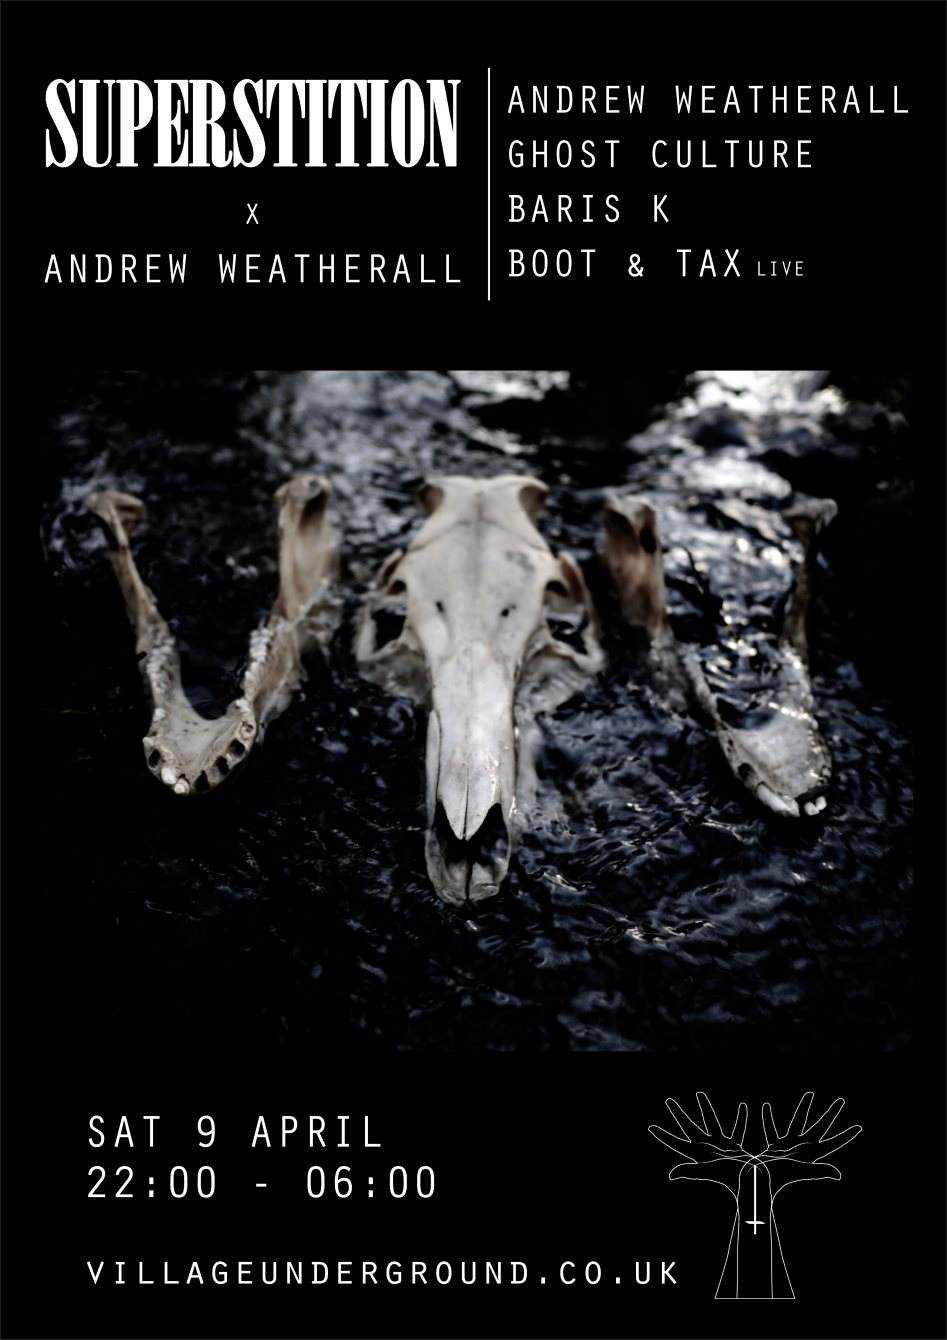 Superstition X Andrew Weatherall, Ghost Culture, Baris K, Boot & Tax - Página trasera